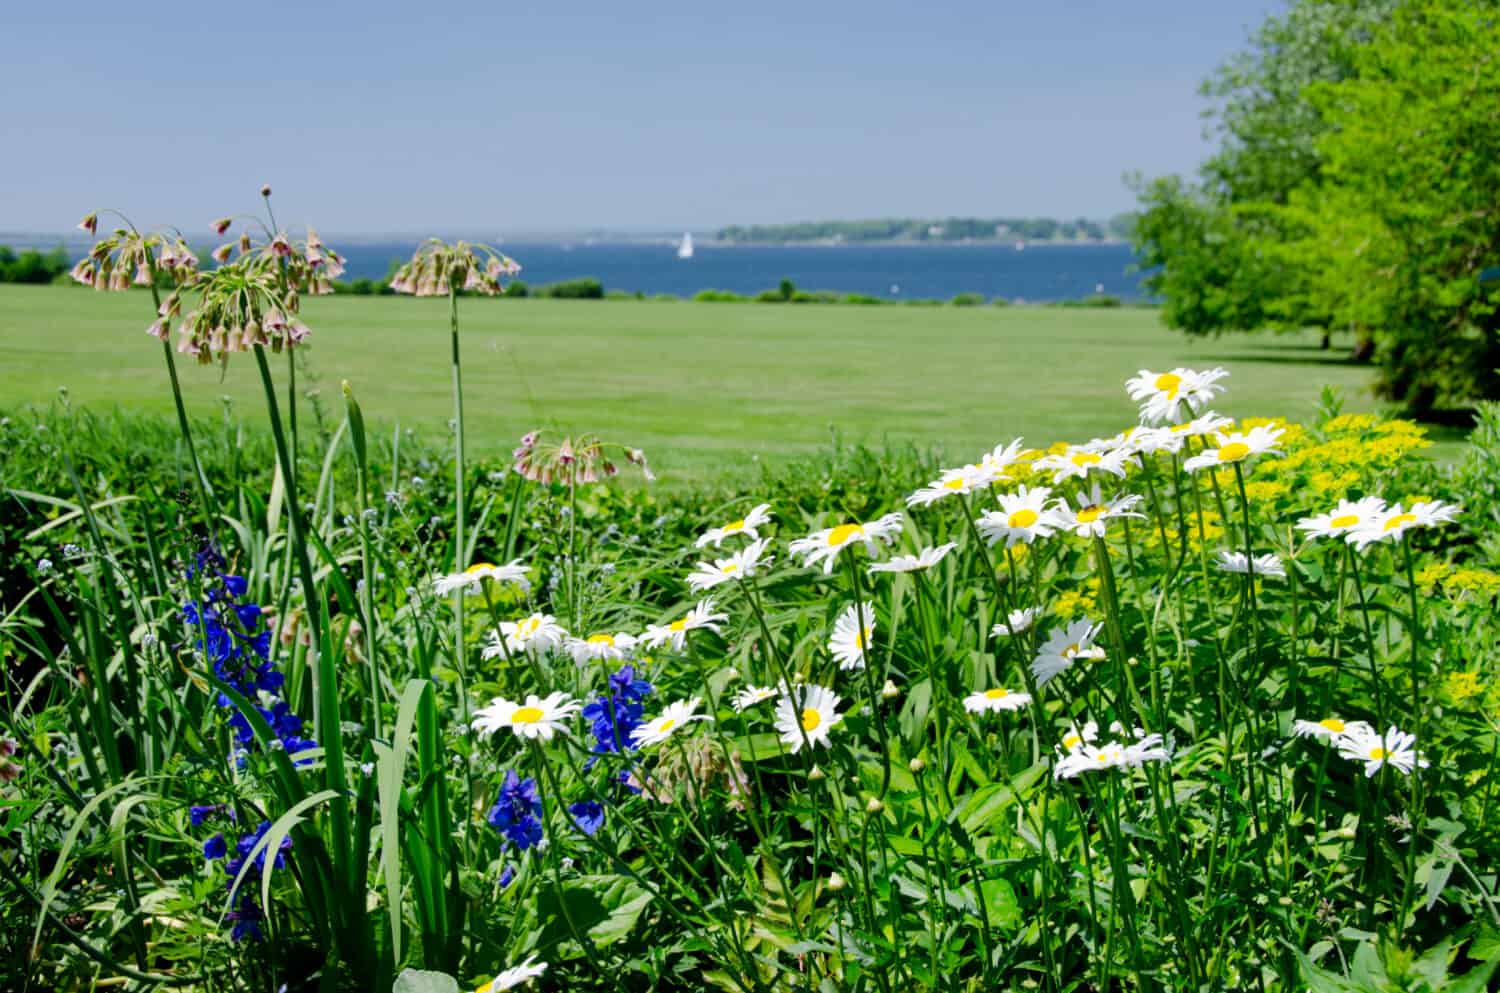 Flowers in Rhode Island. Historic Blithewold Mansion, Gardens and Arboretum. Extensive grounds and garden with view of Narragansett Bay.